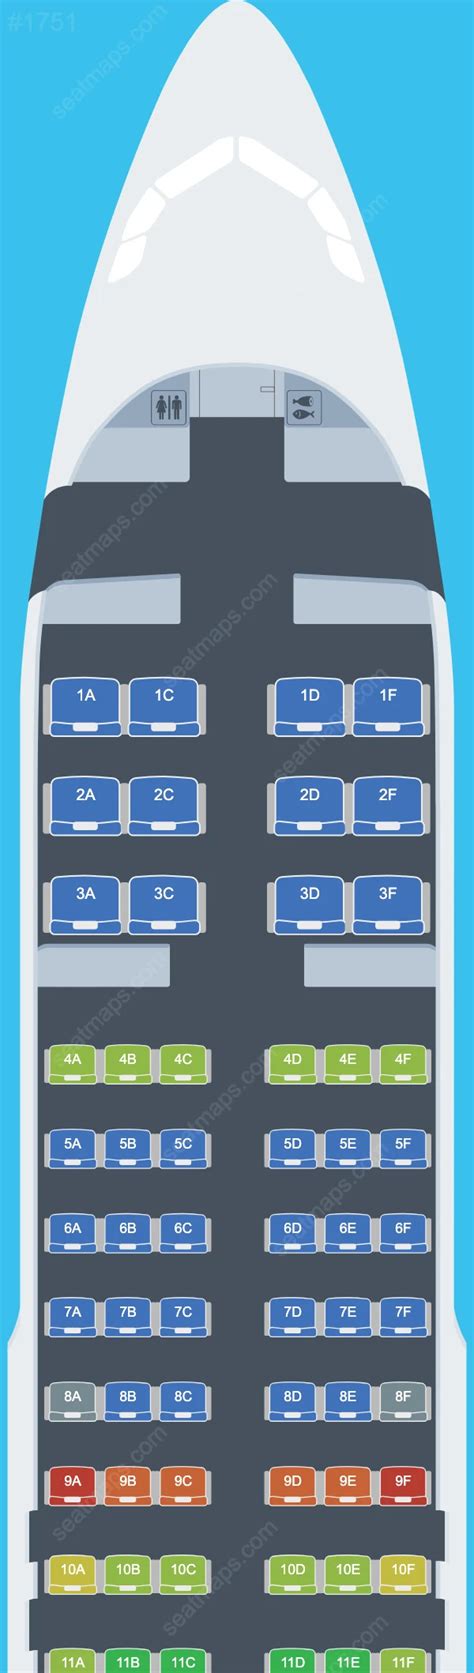 American Airlines Airbus A Seat Map Updated Find The Best Hot